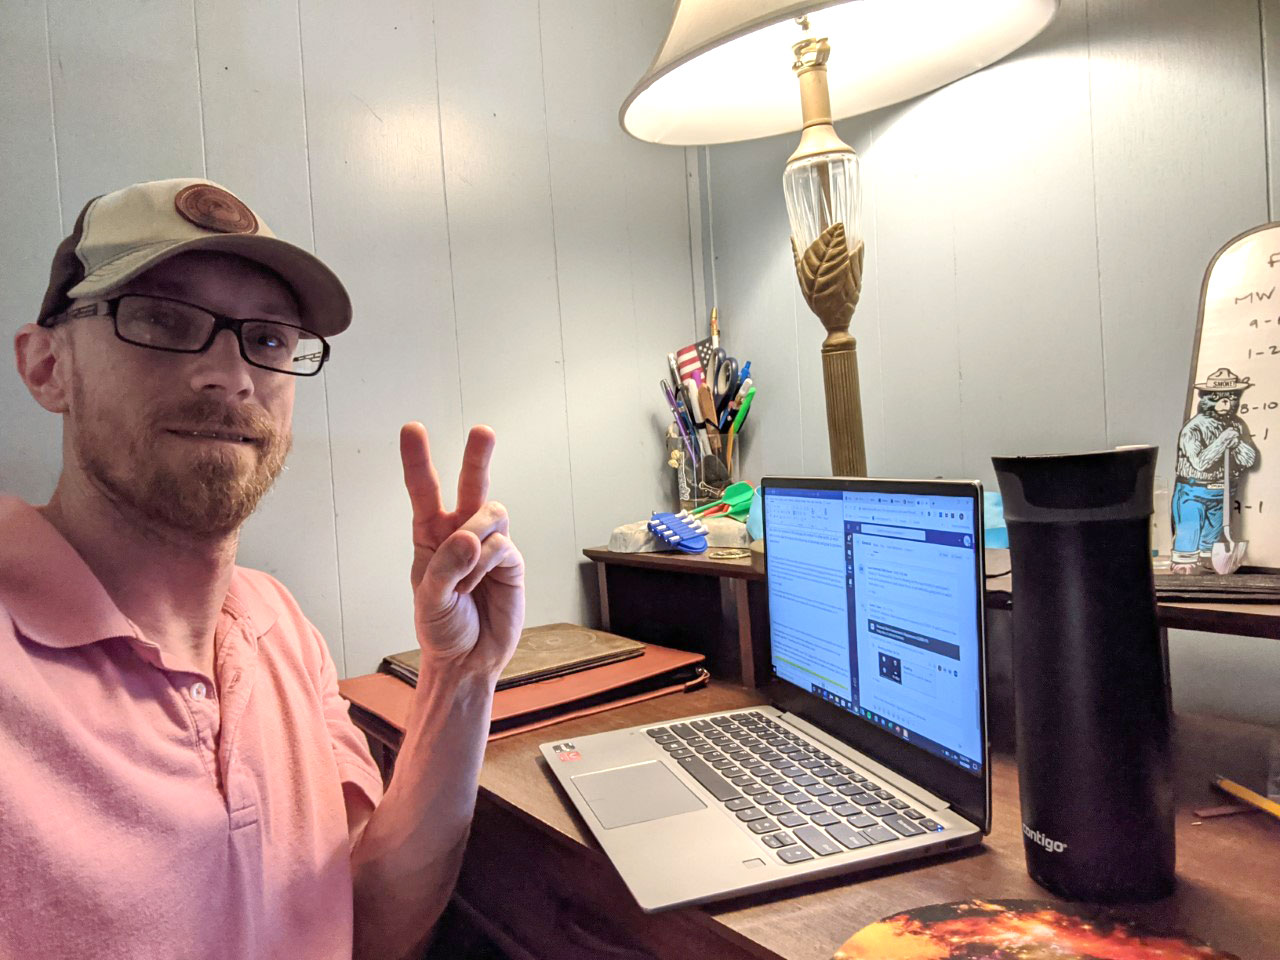 Cory Morris sitting at desk in his home during pandemic taking online class over the pandemic